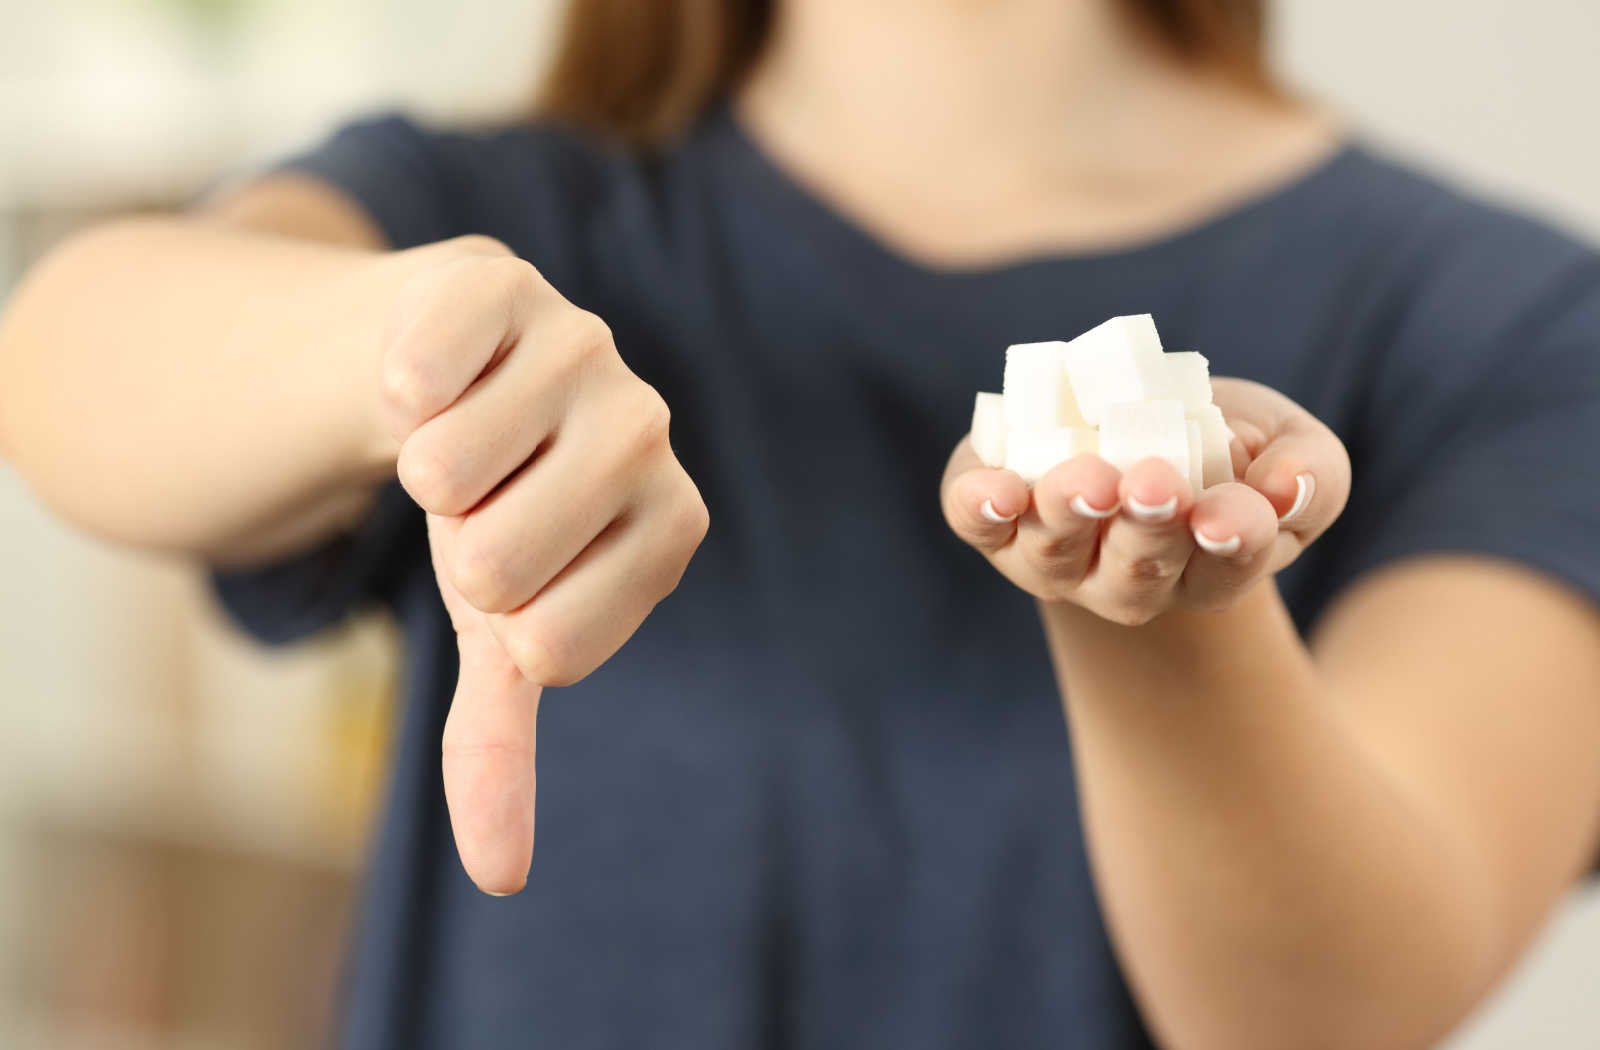 A close-up of a woman with her left hand holding sugar cubes in her palm and thumbs down on her right hand.
Eating too many sugary or acidic foods can contribute to the breakdown of your enamel, which leads to cavities and tooth decay.